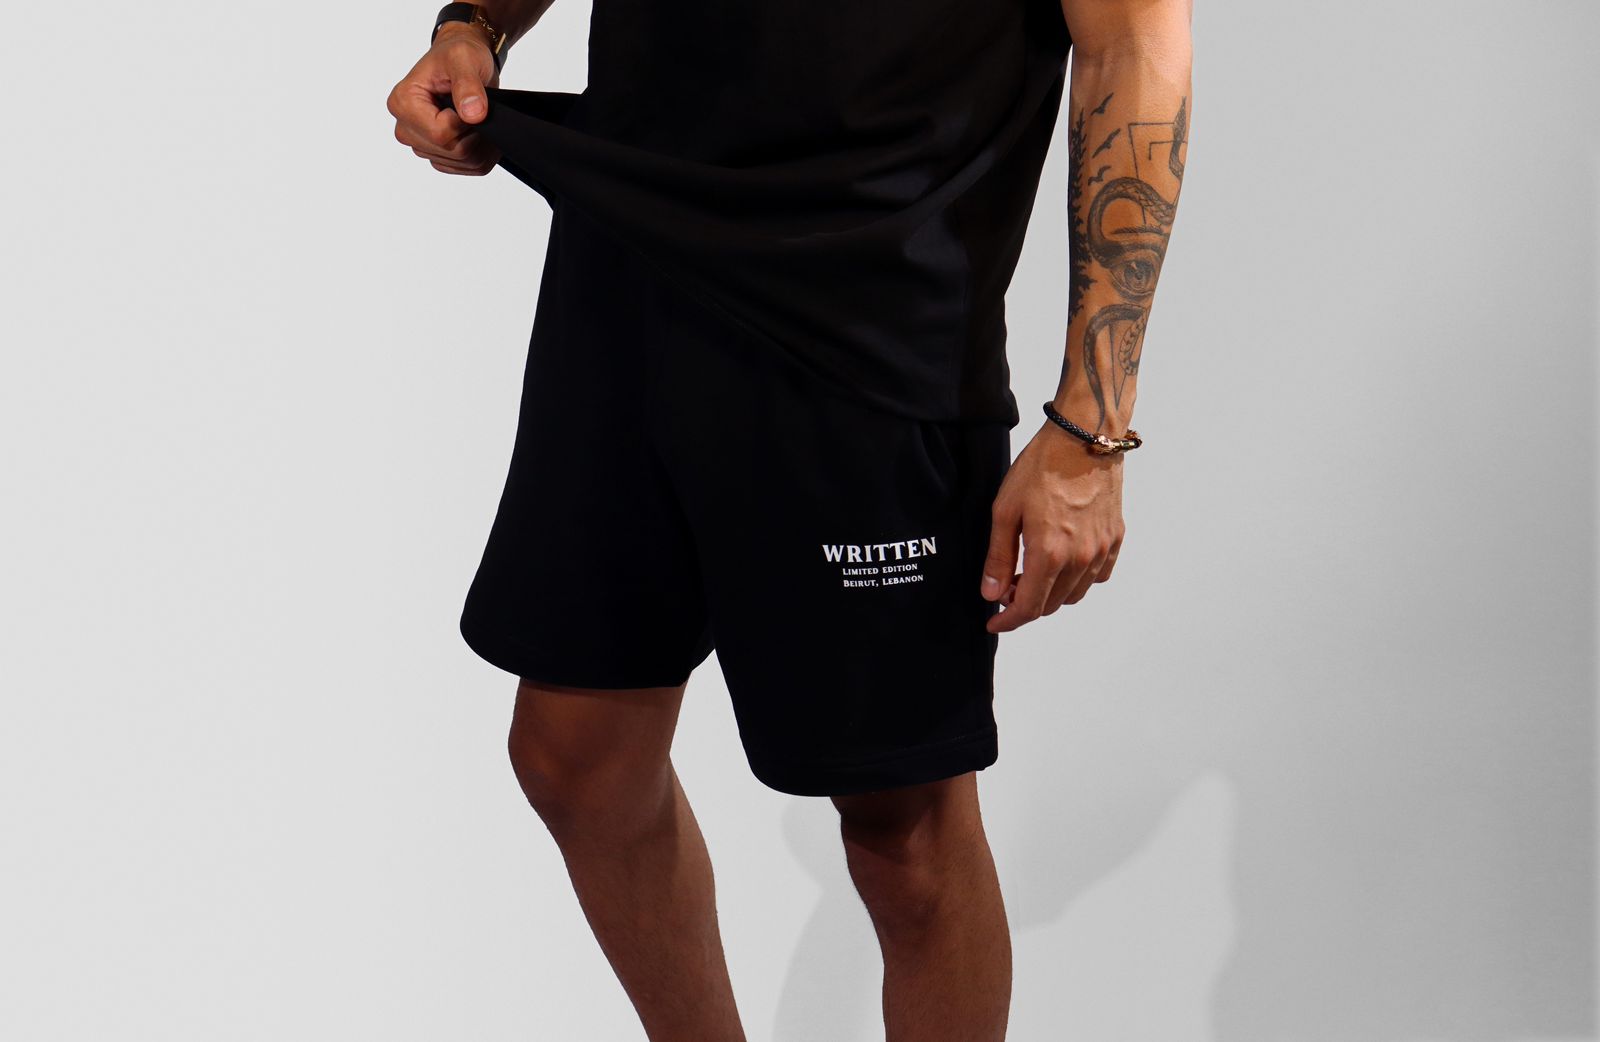 The Black Limited Edition Shorts